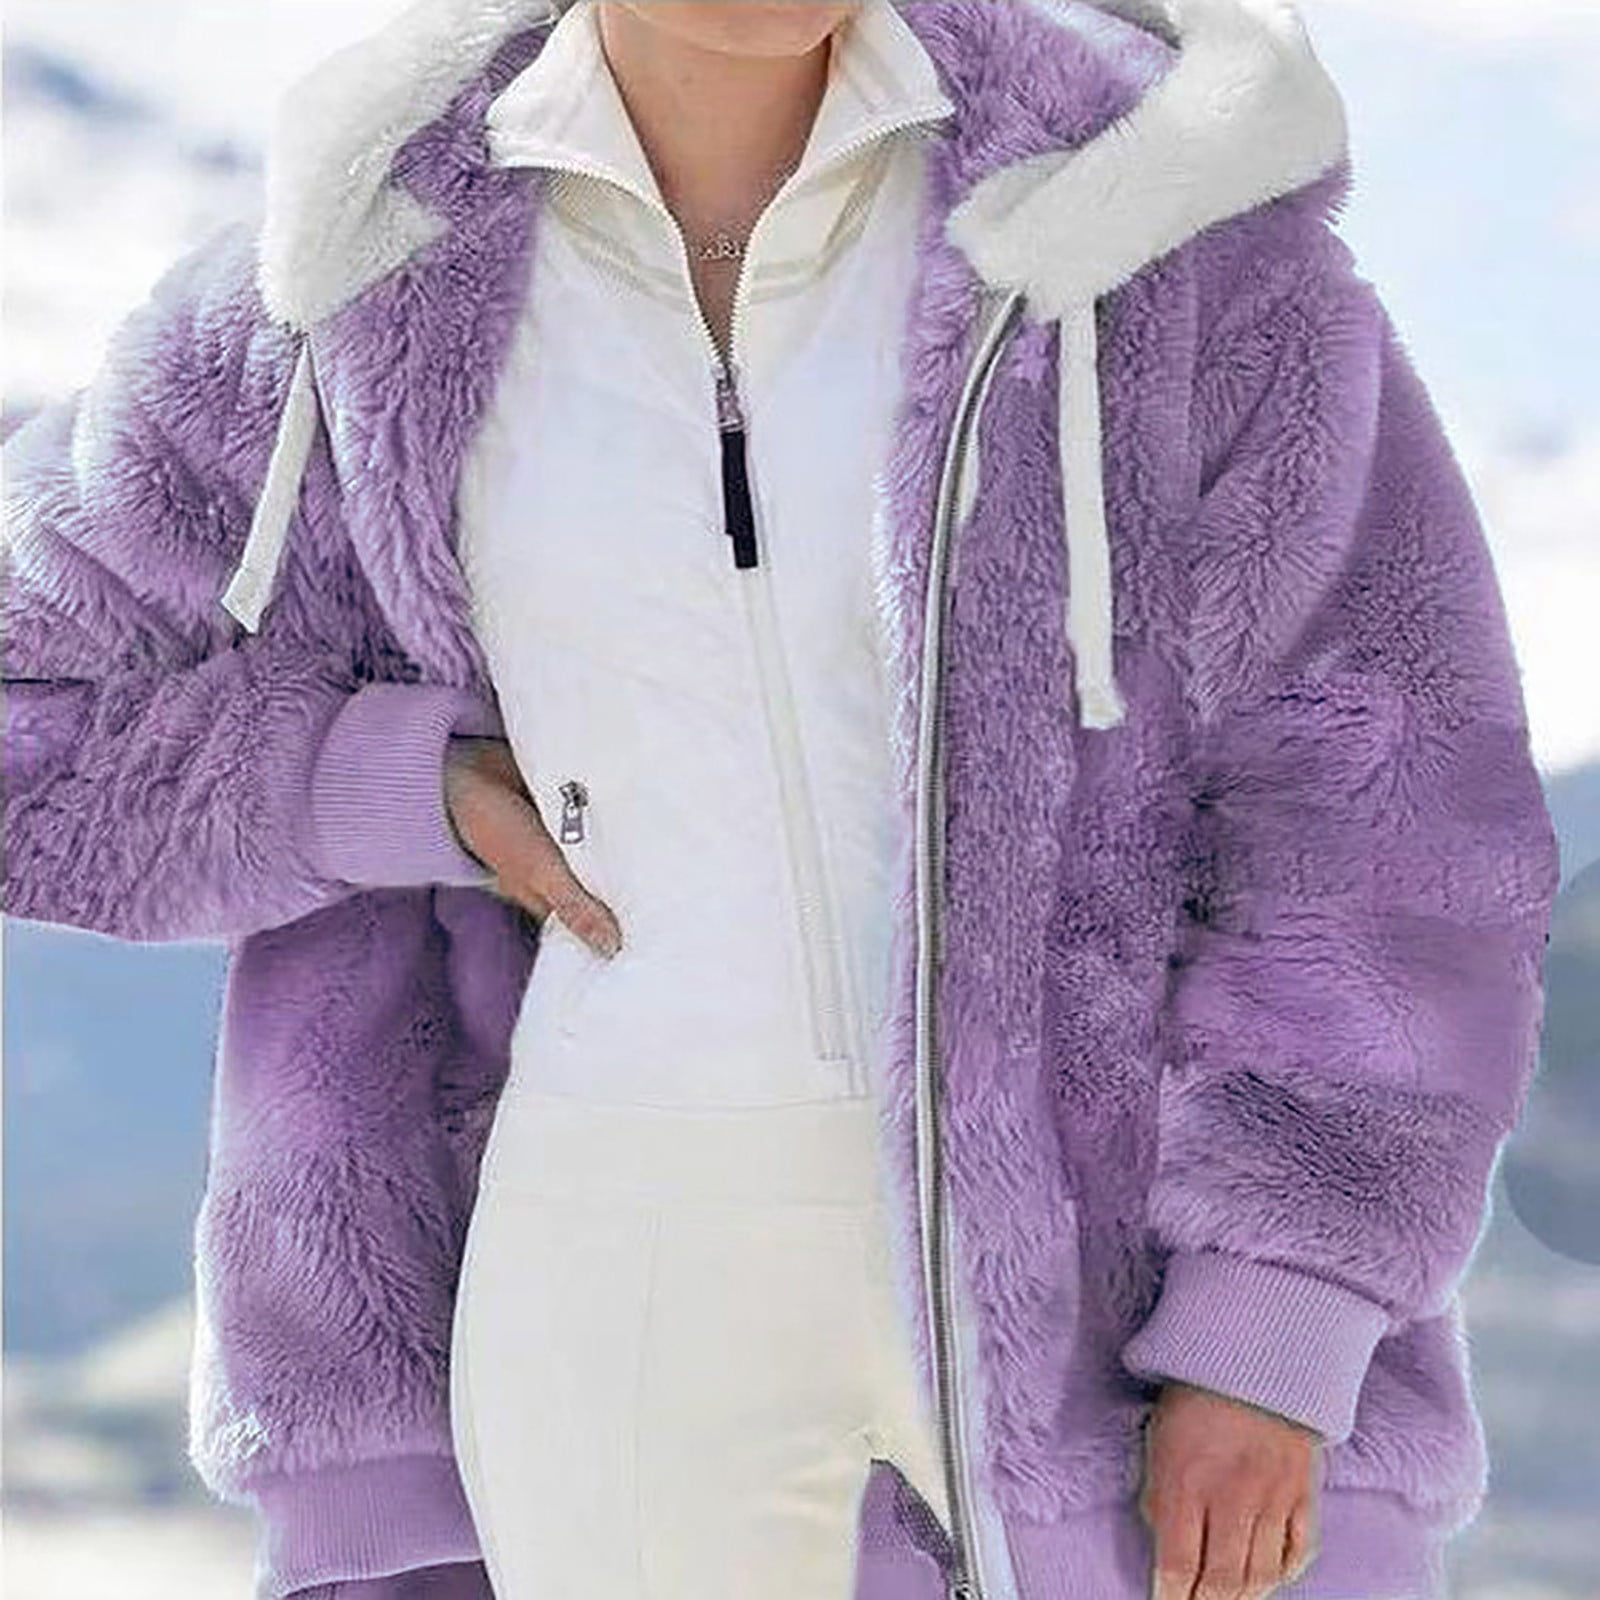 Bed Jackets for Women Winter Clothes for Women Warm Fuzzy Fleece Jacket ...